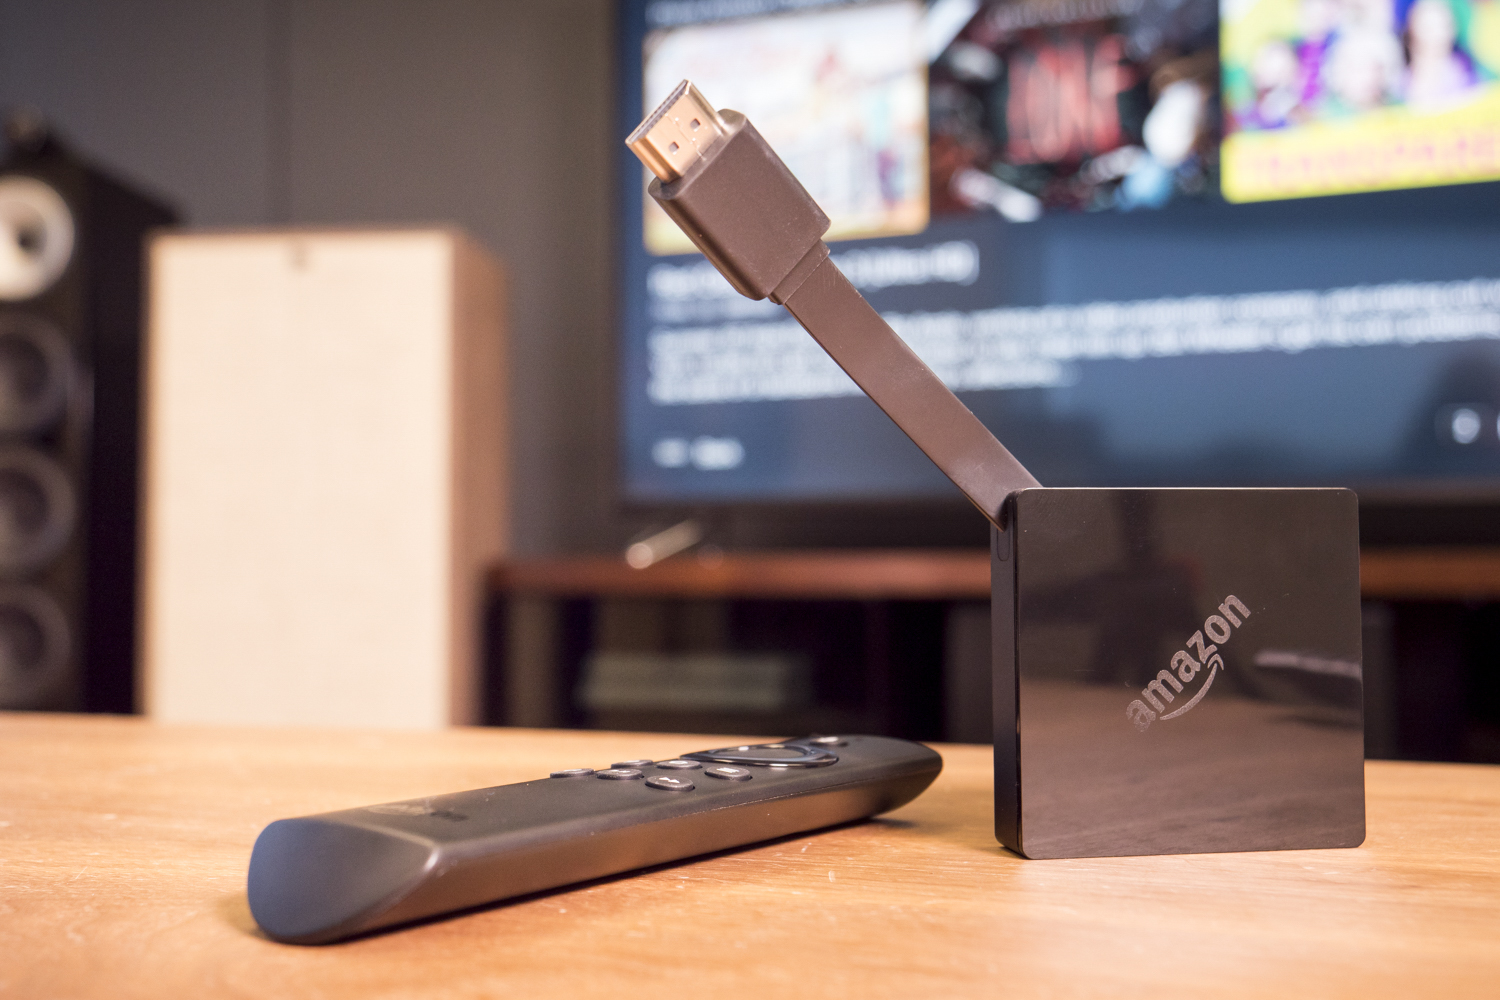 amazon fire tv review 3rd generation 2017 067 1